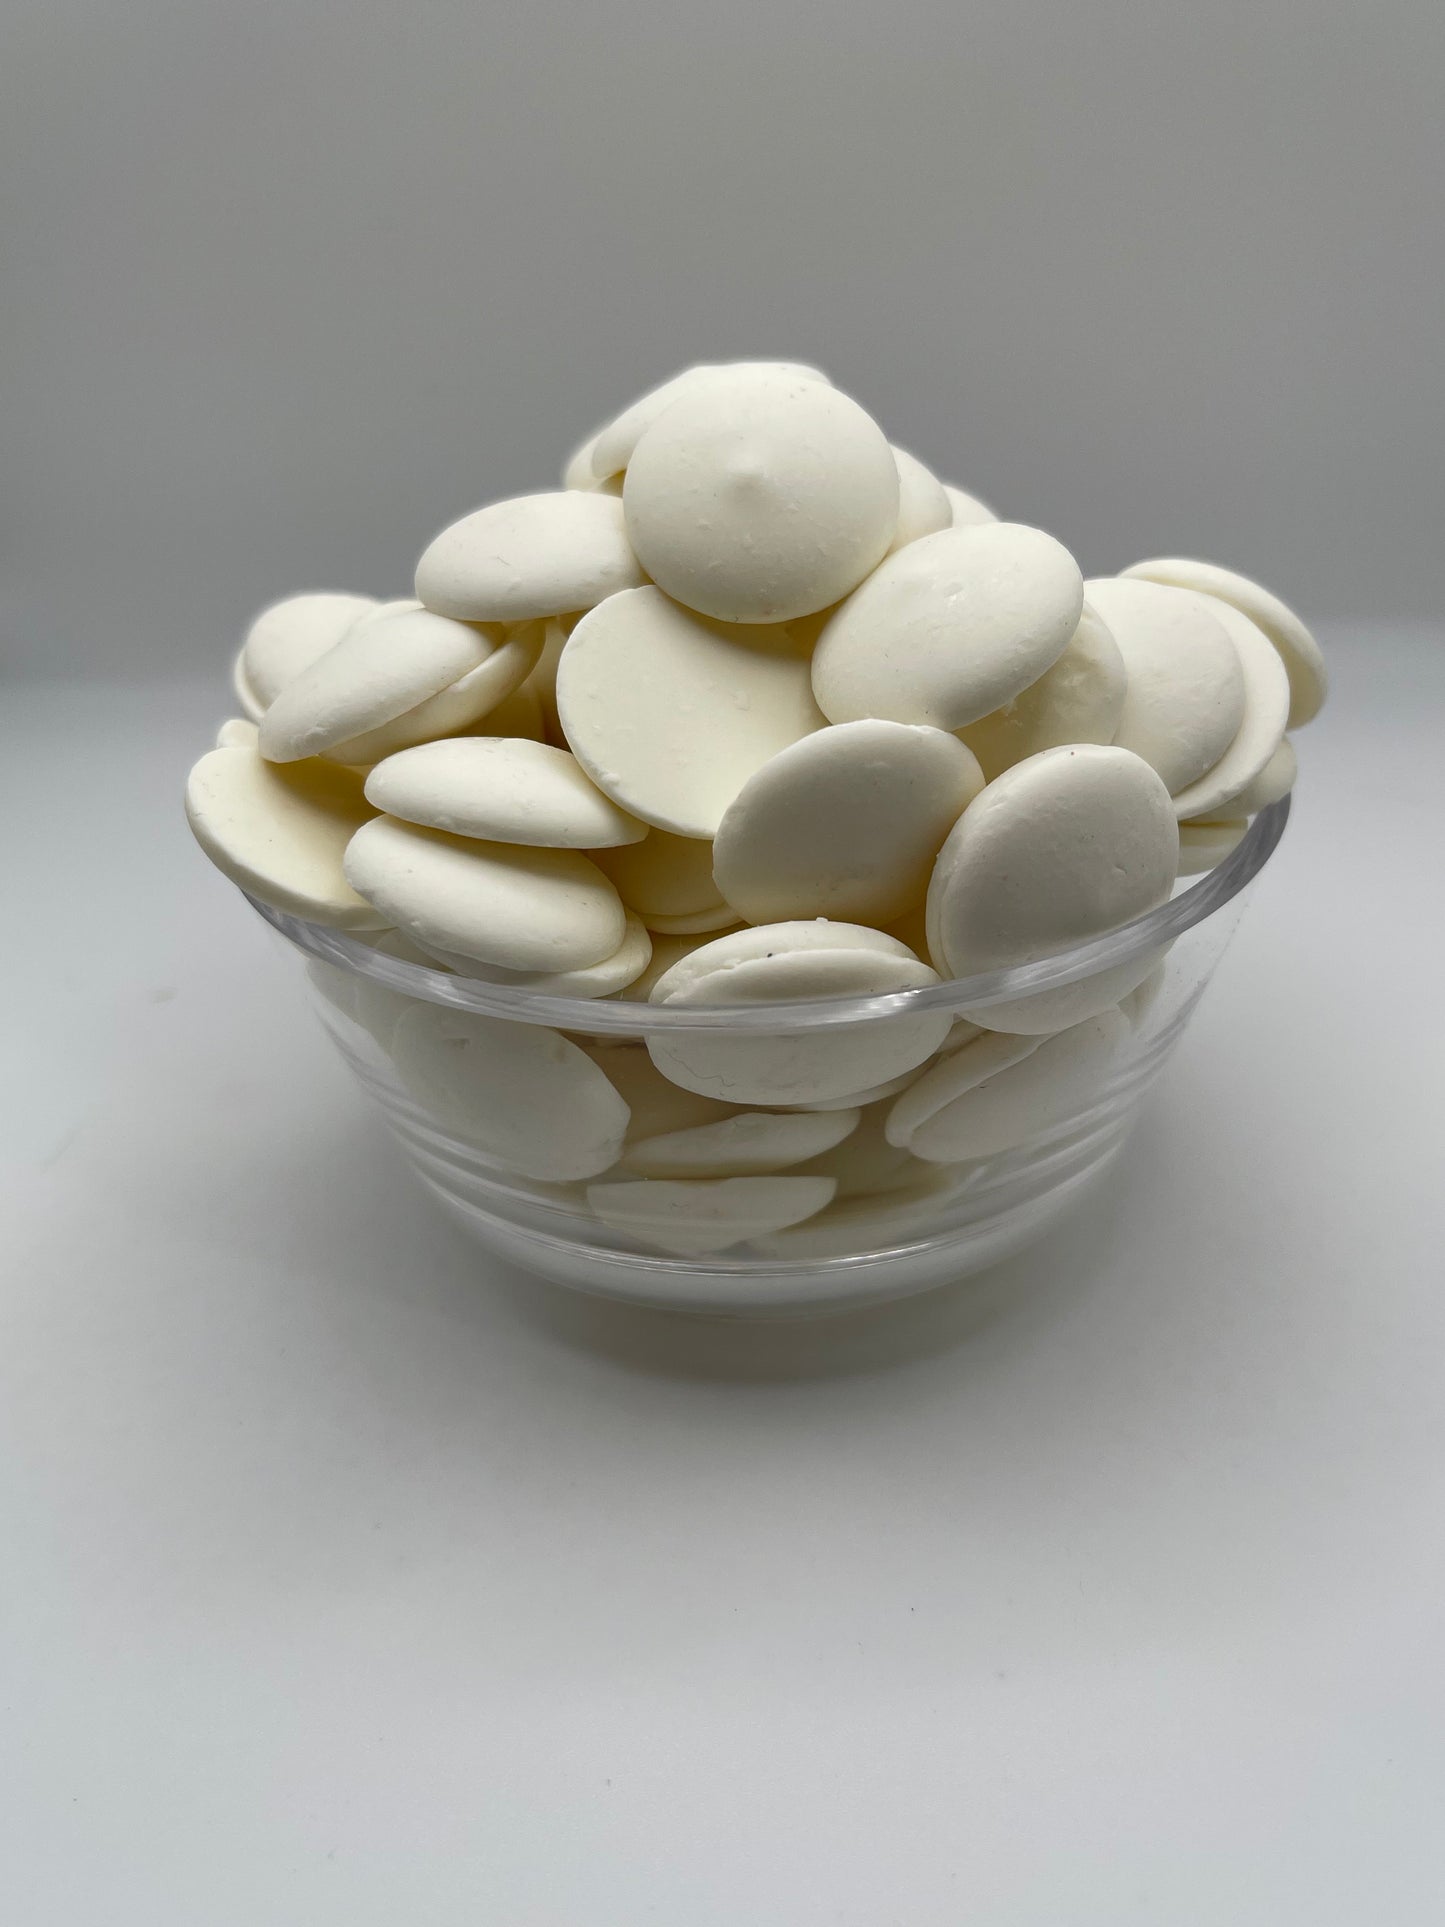 Merckens White Candy Coating Wafers - 1 lb › Sugar Art Cake & Candy Supplies